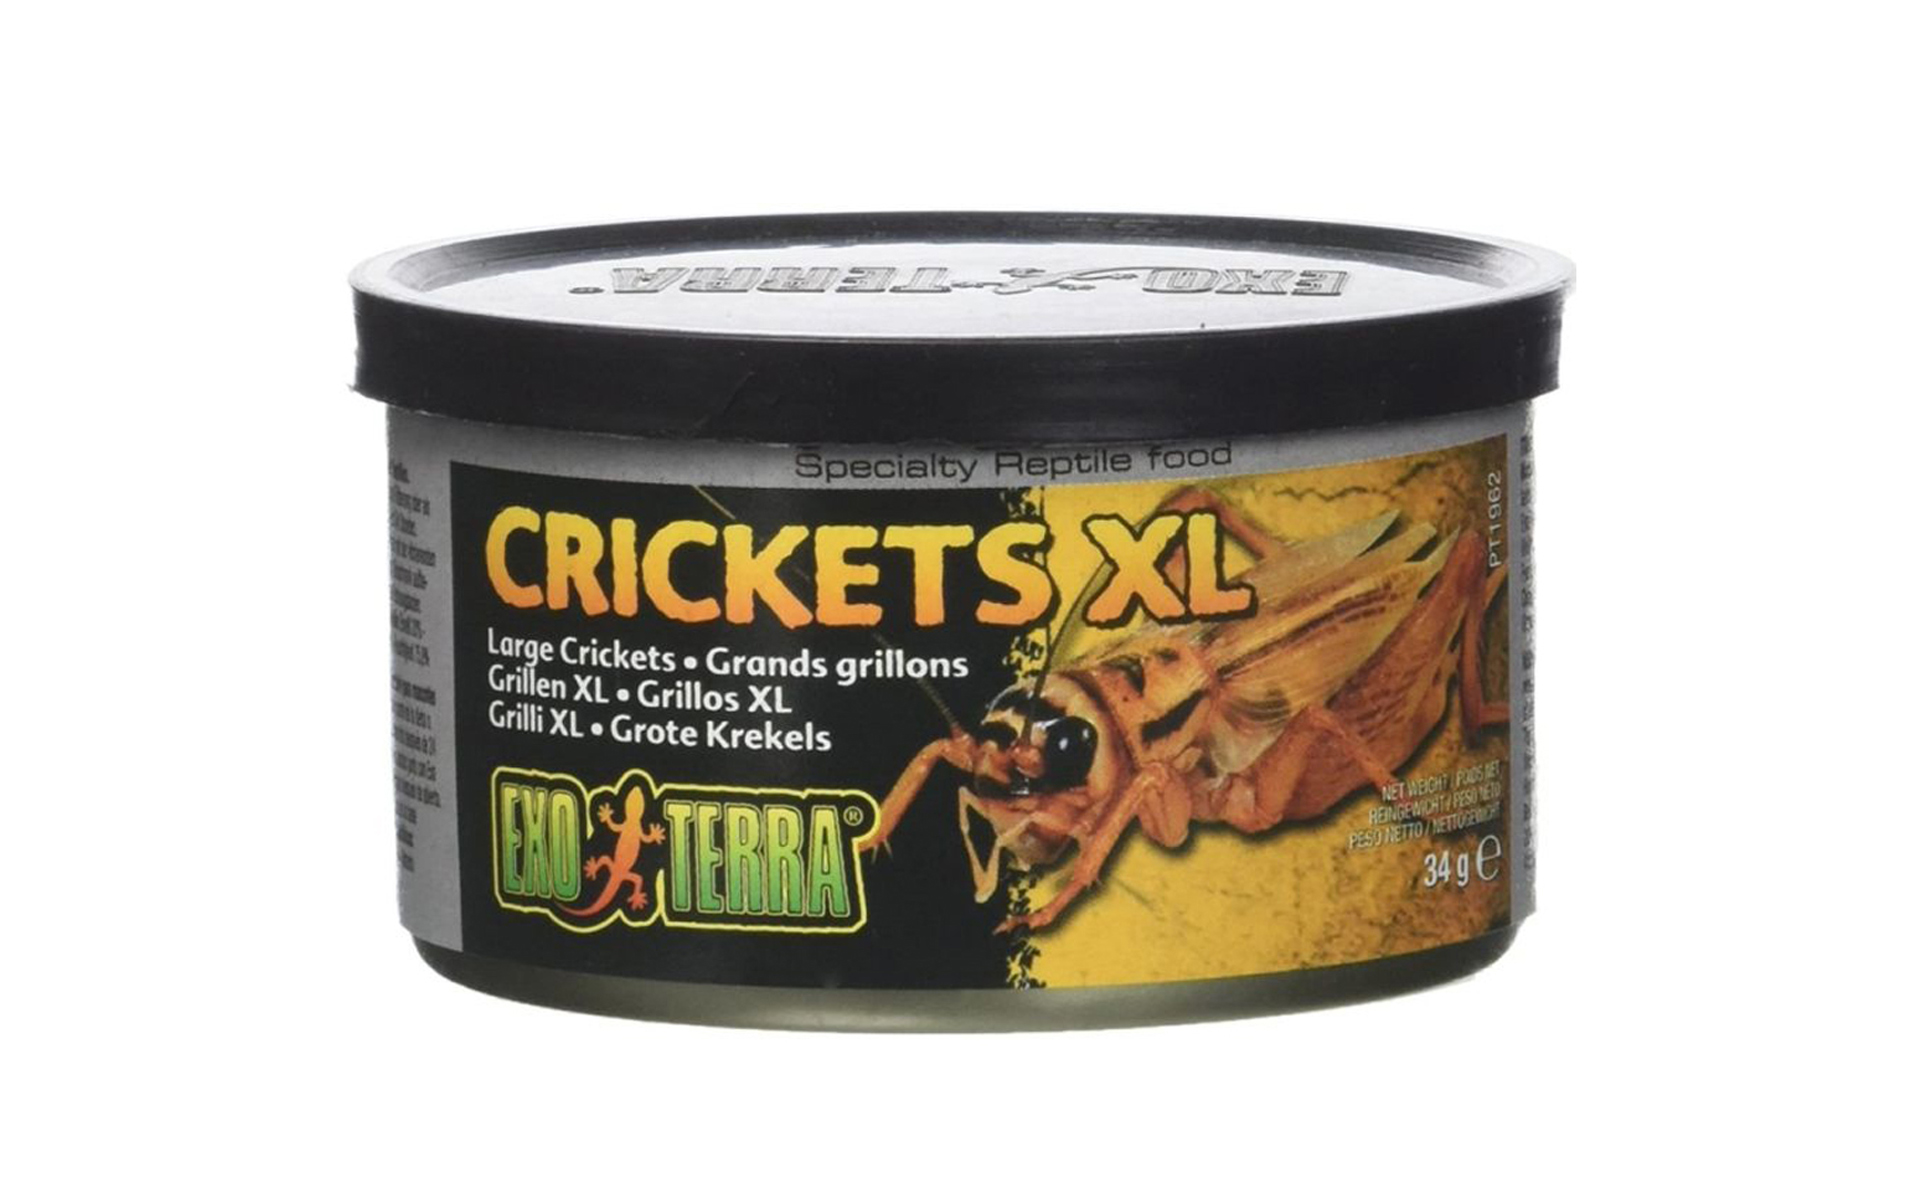 Canned Crickets XL Specialty Reptile Food, 1.2 oz